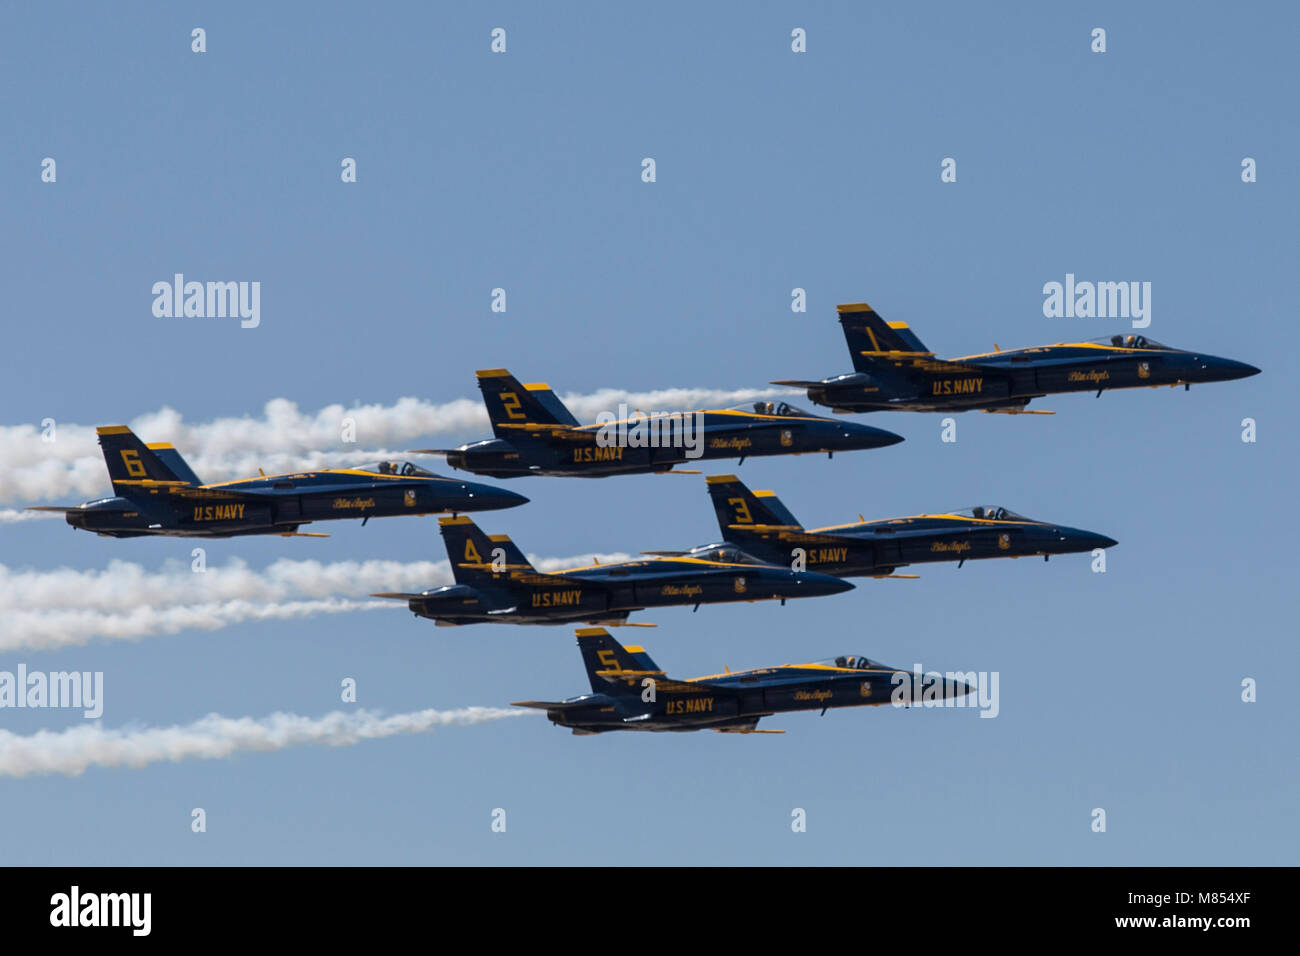 U.S. Navy Blue Angels perform a fly-by over Marine Corps Air Station (MCAS) Yuma, Ariz., March 14, 2018. The Blue Angels are unable to attend this year’s MCAS Yuma Air Show and conducted the fly-by as a thank you to the local community for their invitation. (U.S. Marine Corps photo by Sgt Allison Lotz) Stock Photo